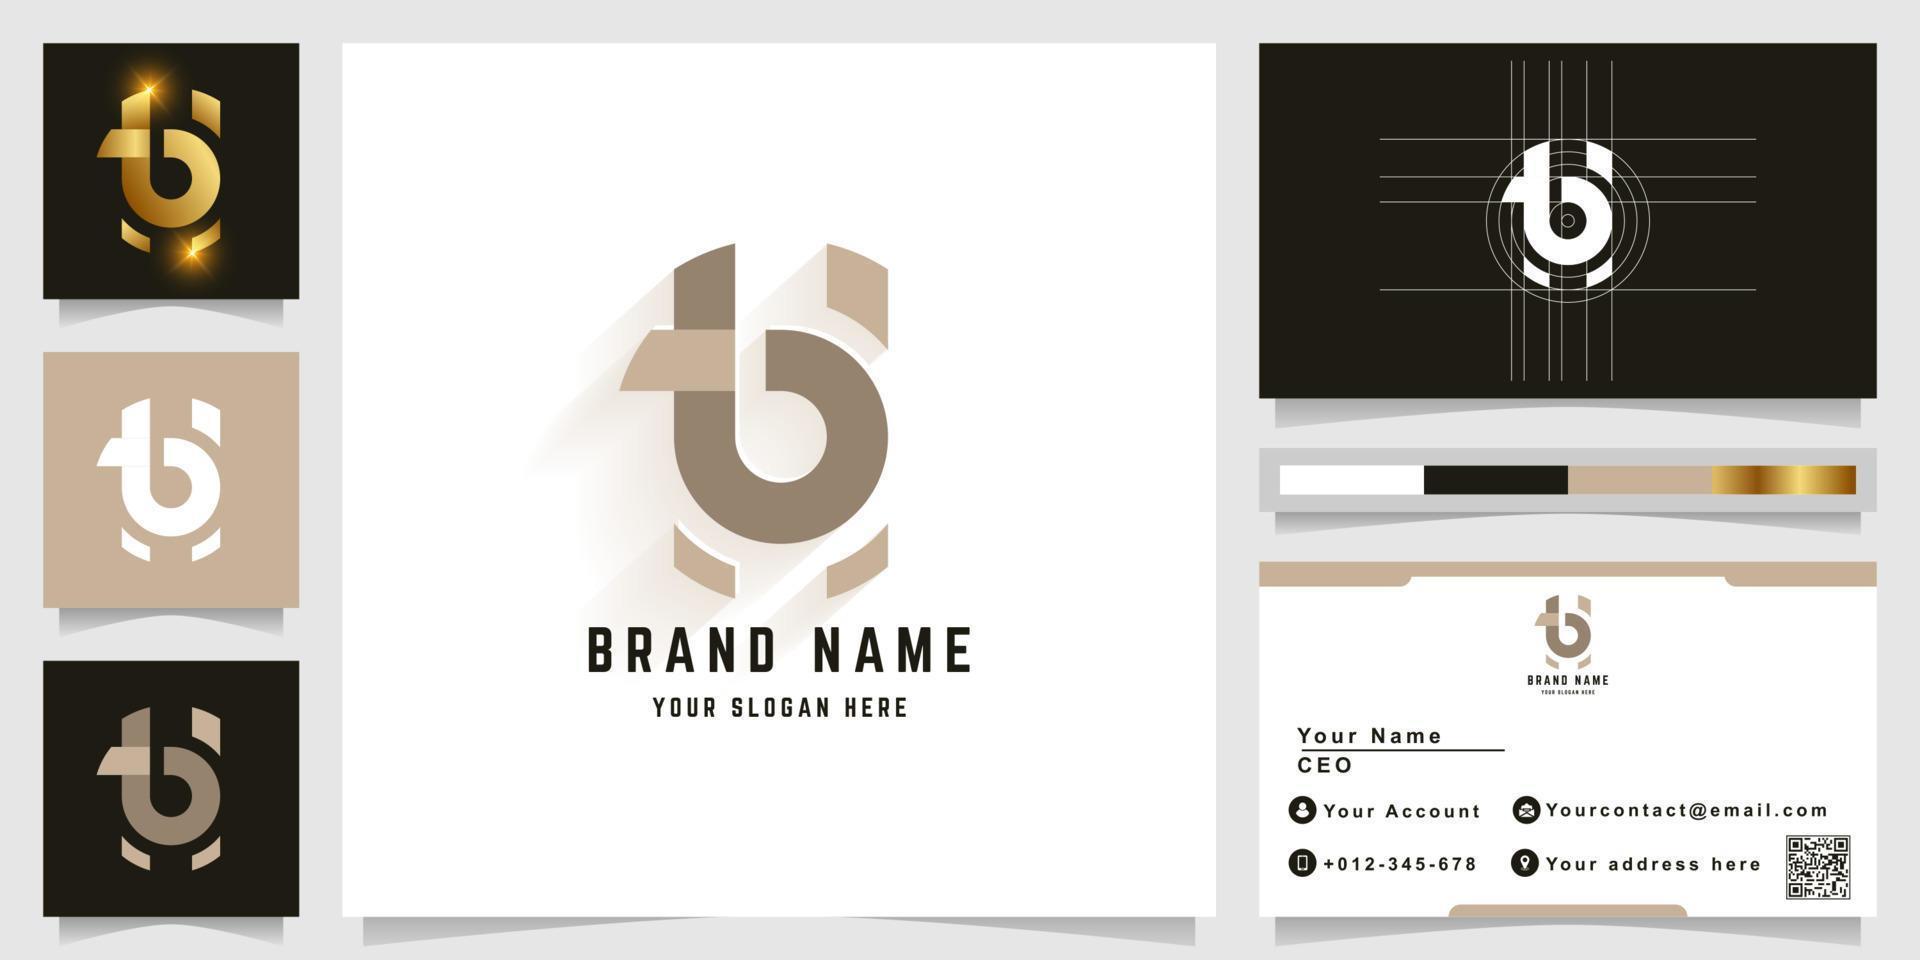 Letter bH or Hb monogram logo with business card design vector